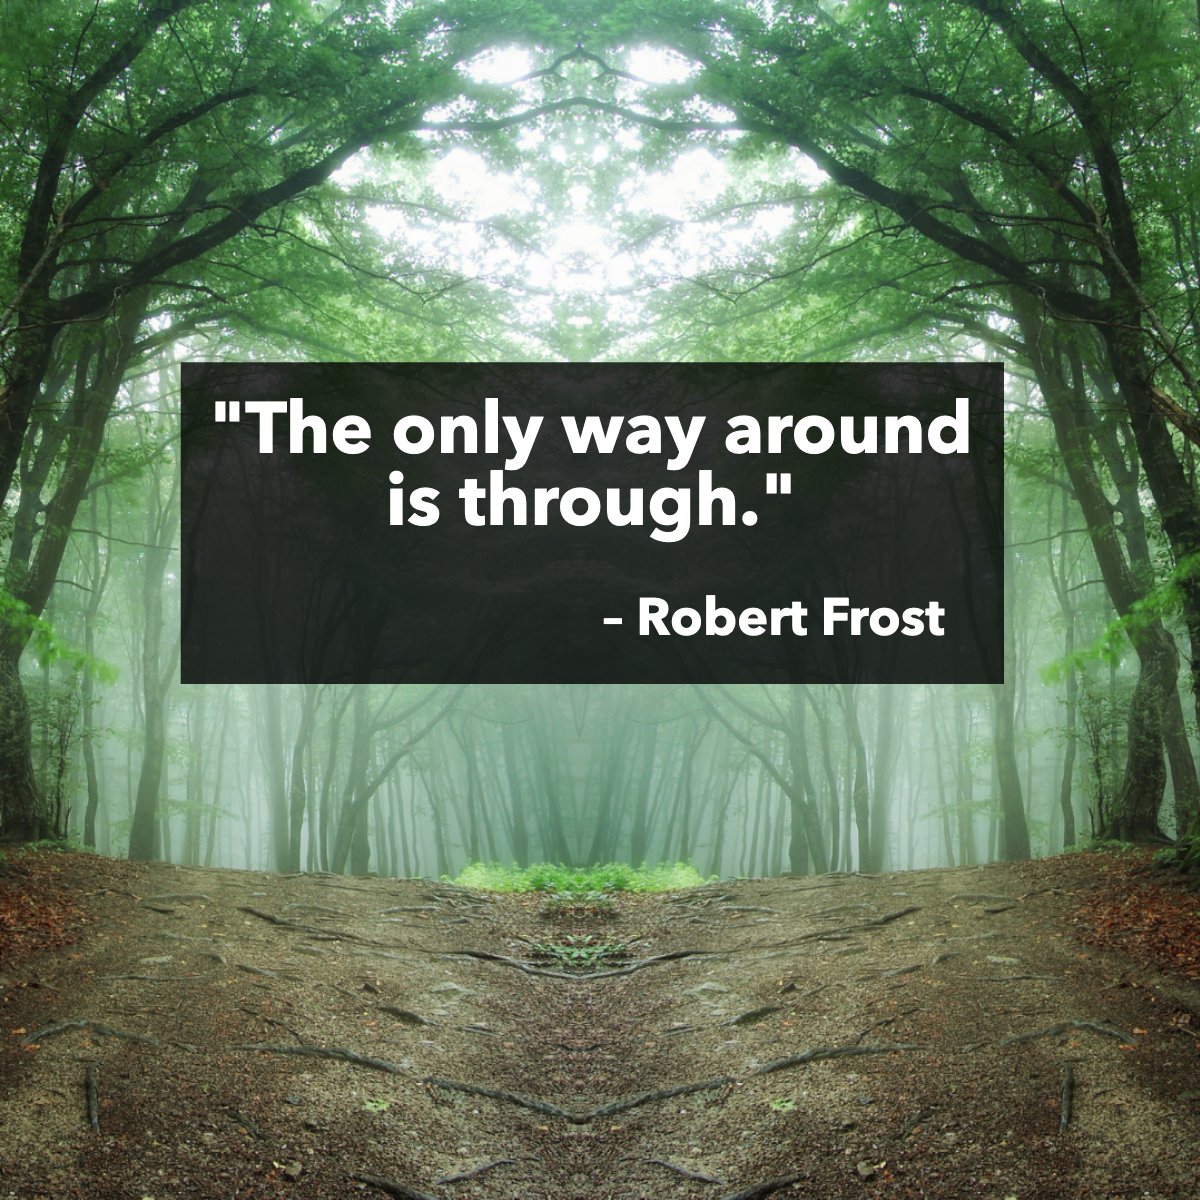 'The only way around is through.' 
– Robert Frost

What obstacles are you conquering today 

#challenges #inspriring #inspirational #woods #forest #robertfrost #quote
 #ajax #Ajaxrealtor #realestateagent #agentforlife #toprealtorinajax #torontoagent